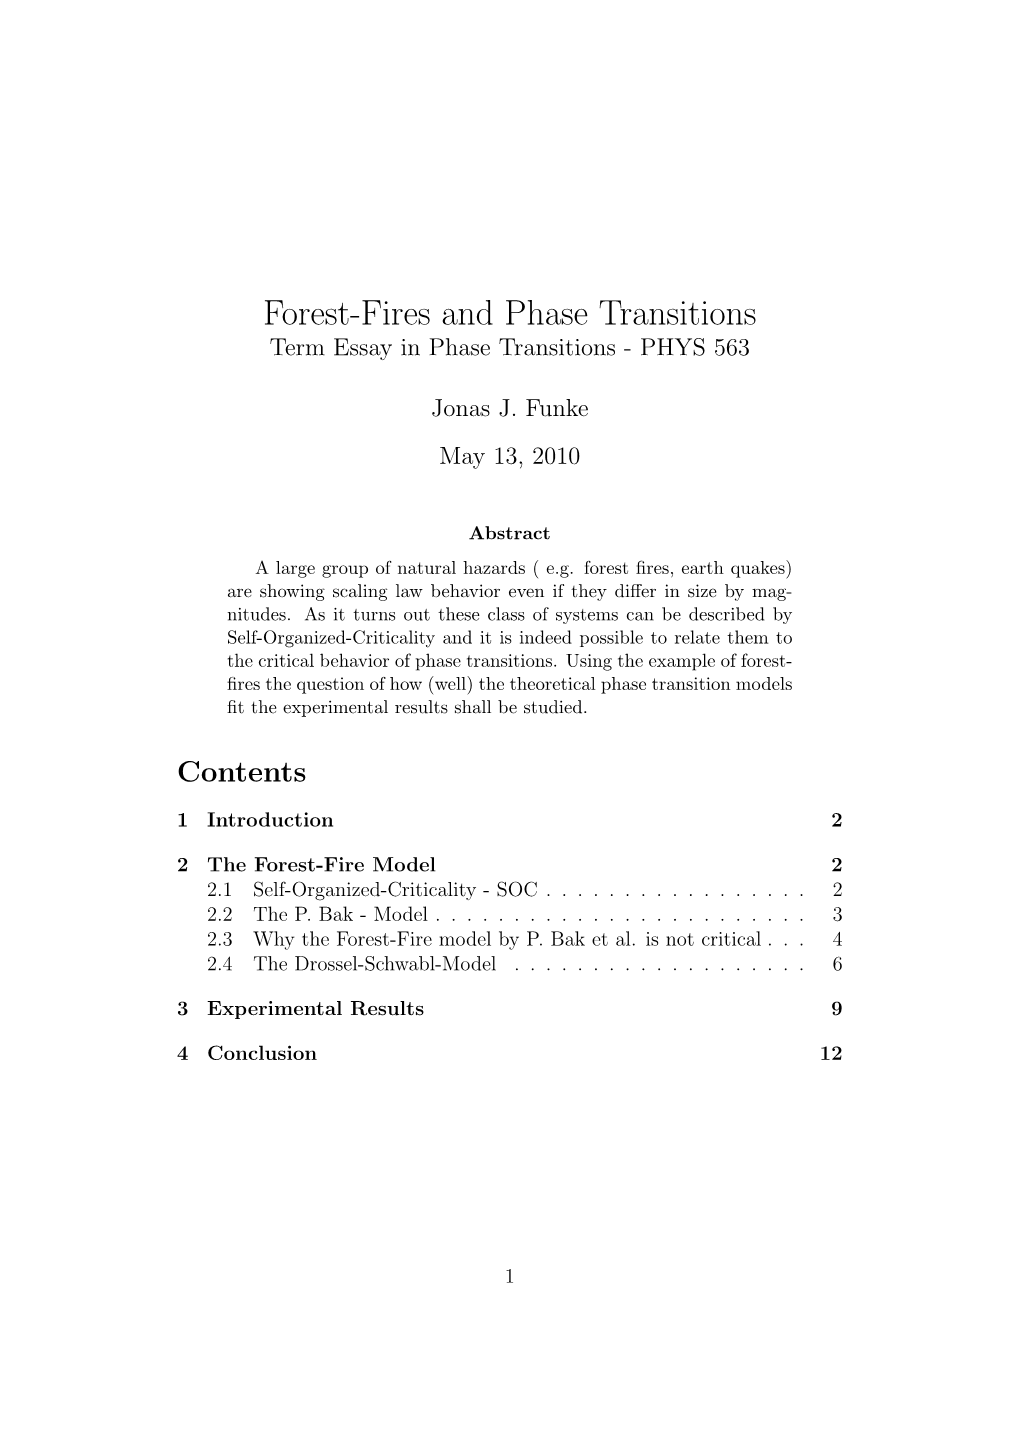 Forest-Fires and Phase Transitions Term Essay in Phase Transitions - PHYS 563